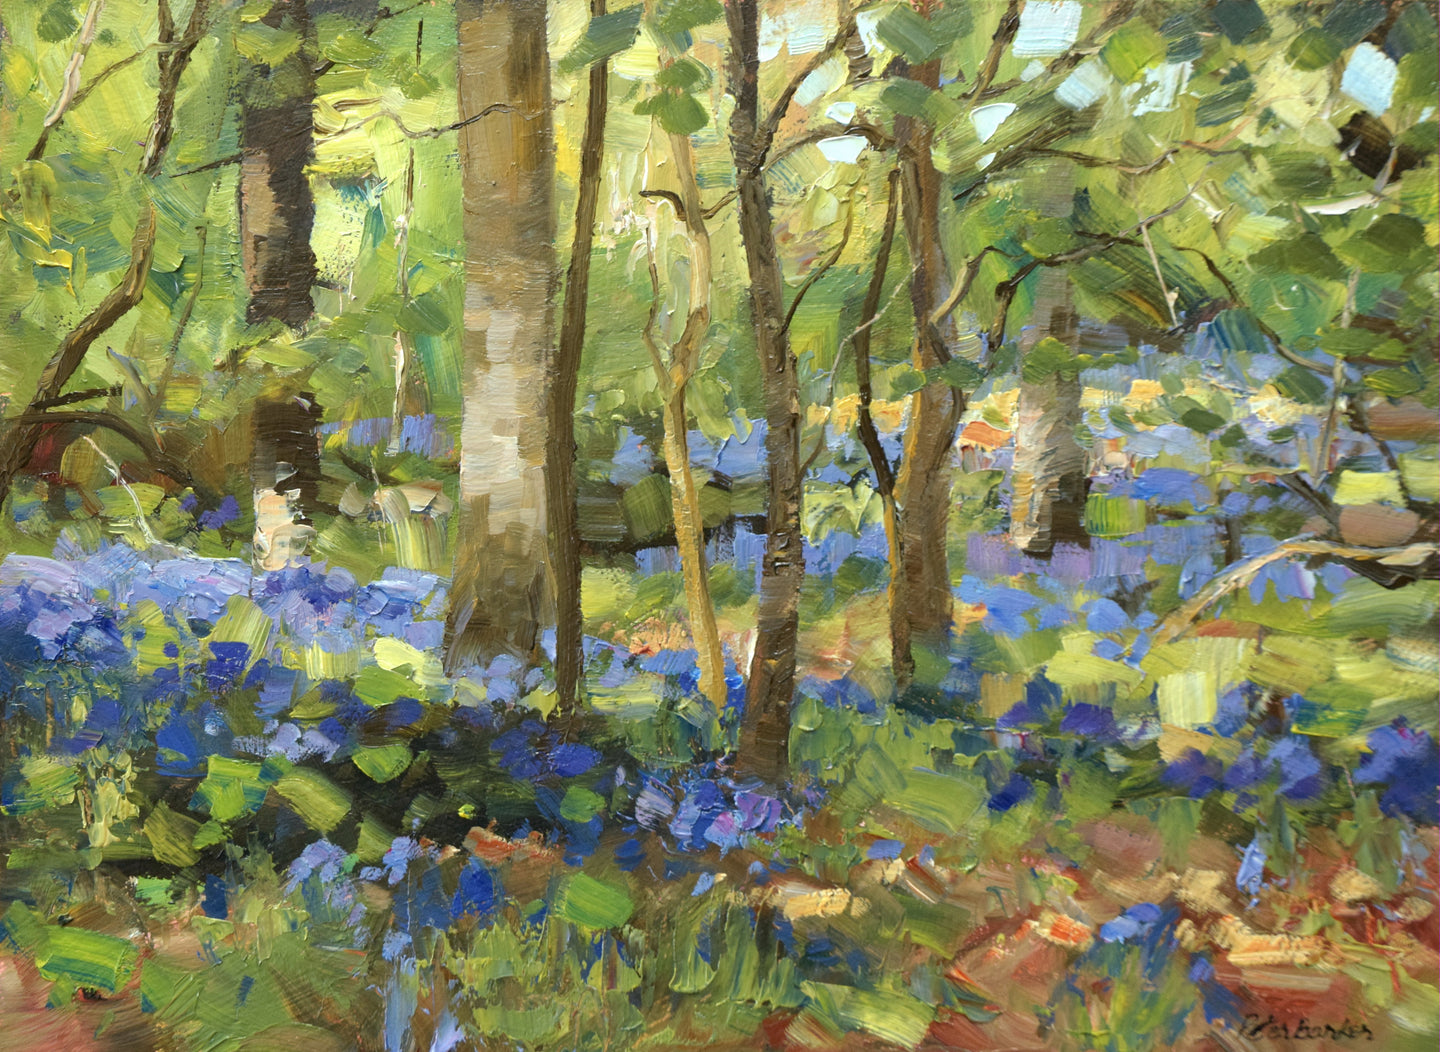 9 x 12 inch oil painting of Bluebells at Barnsdale Wood, painted in a very loose, impressionistic style.